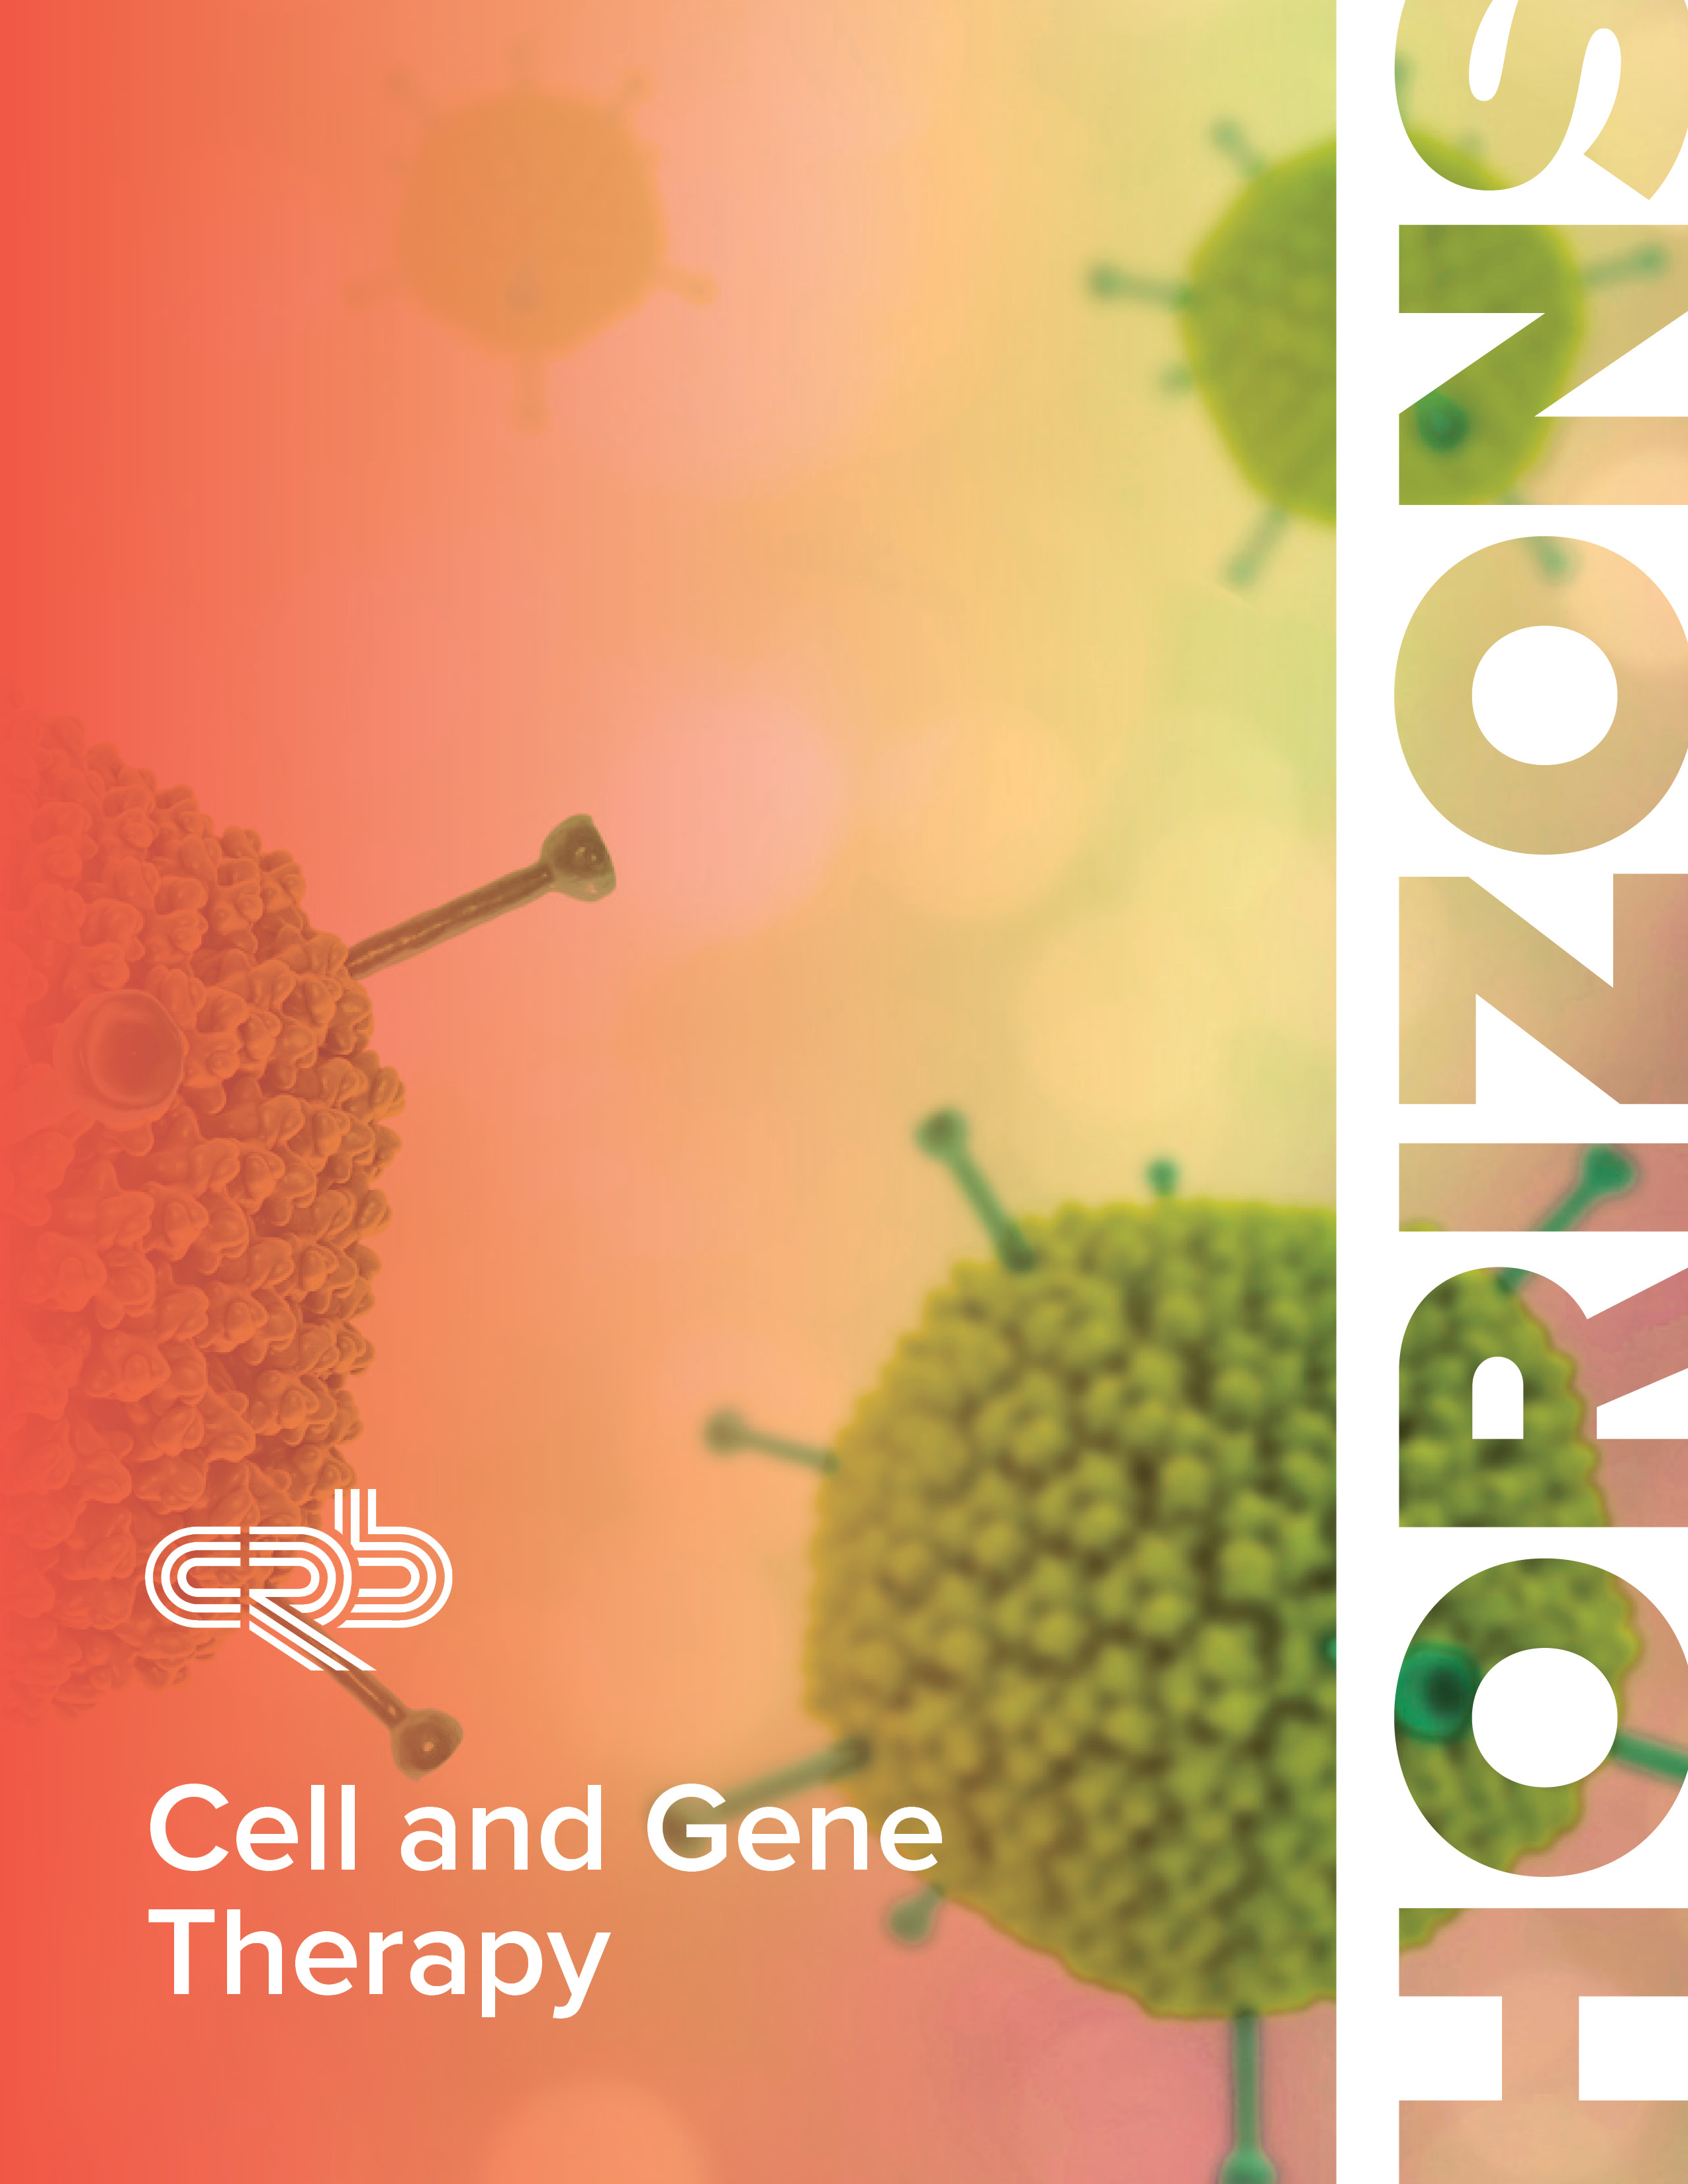 Cell and Gene Therapy Industry Report Cover